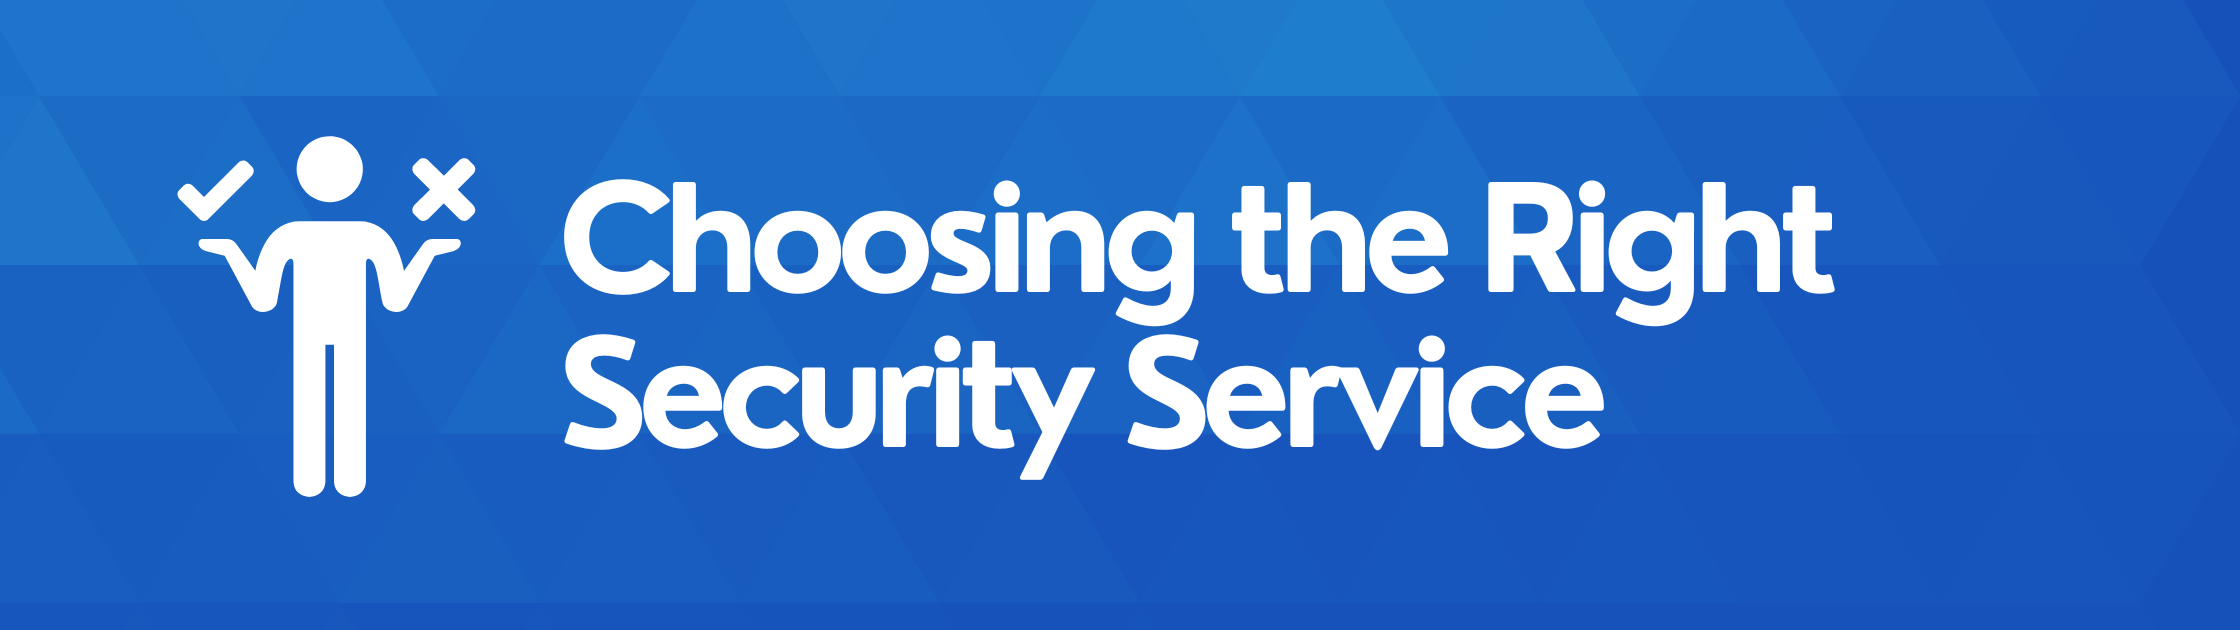 choosing the right security services